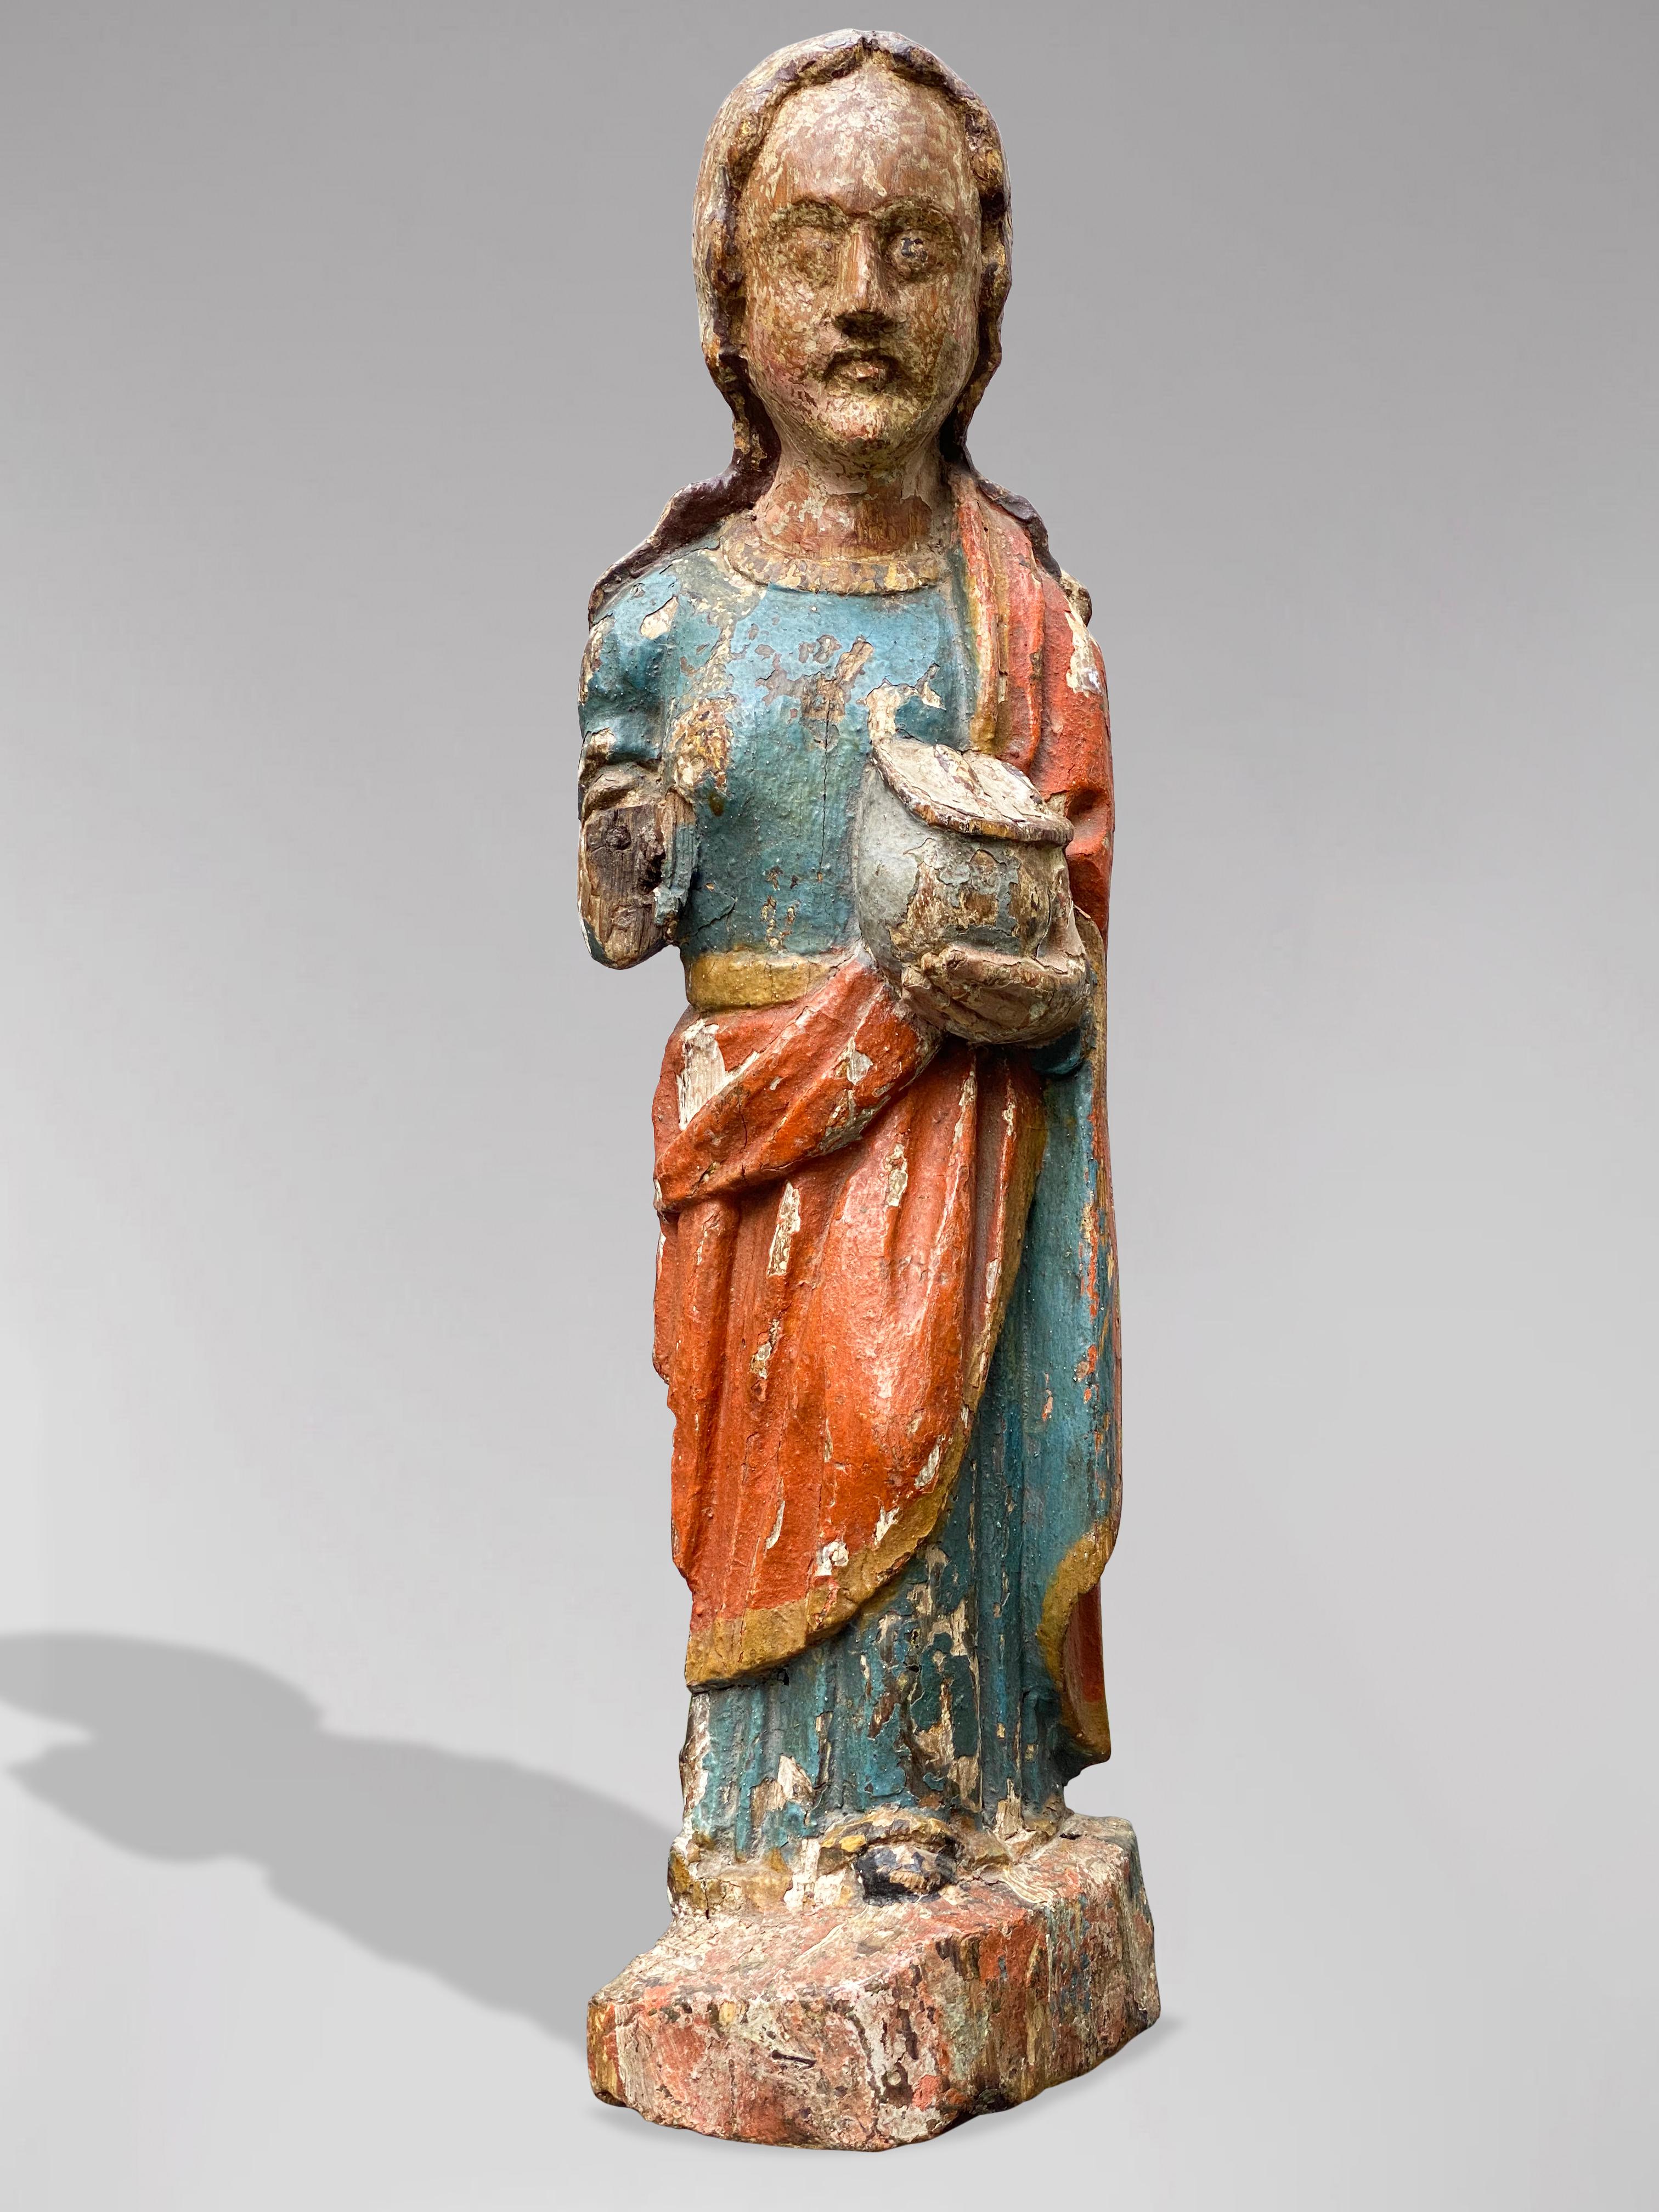 Unknown Figurative Sculpture - A Spanish Gothic Statue of Saint Mary Magdalene, Late 15th Century